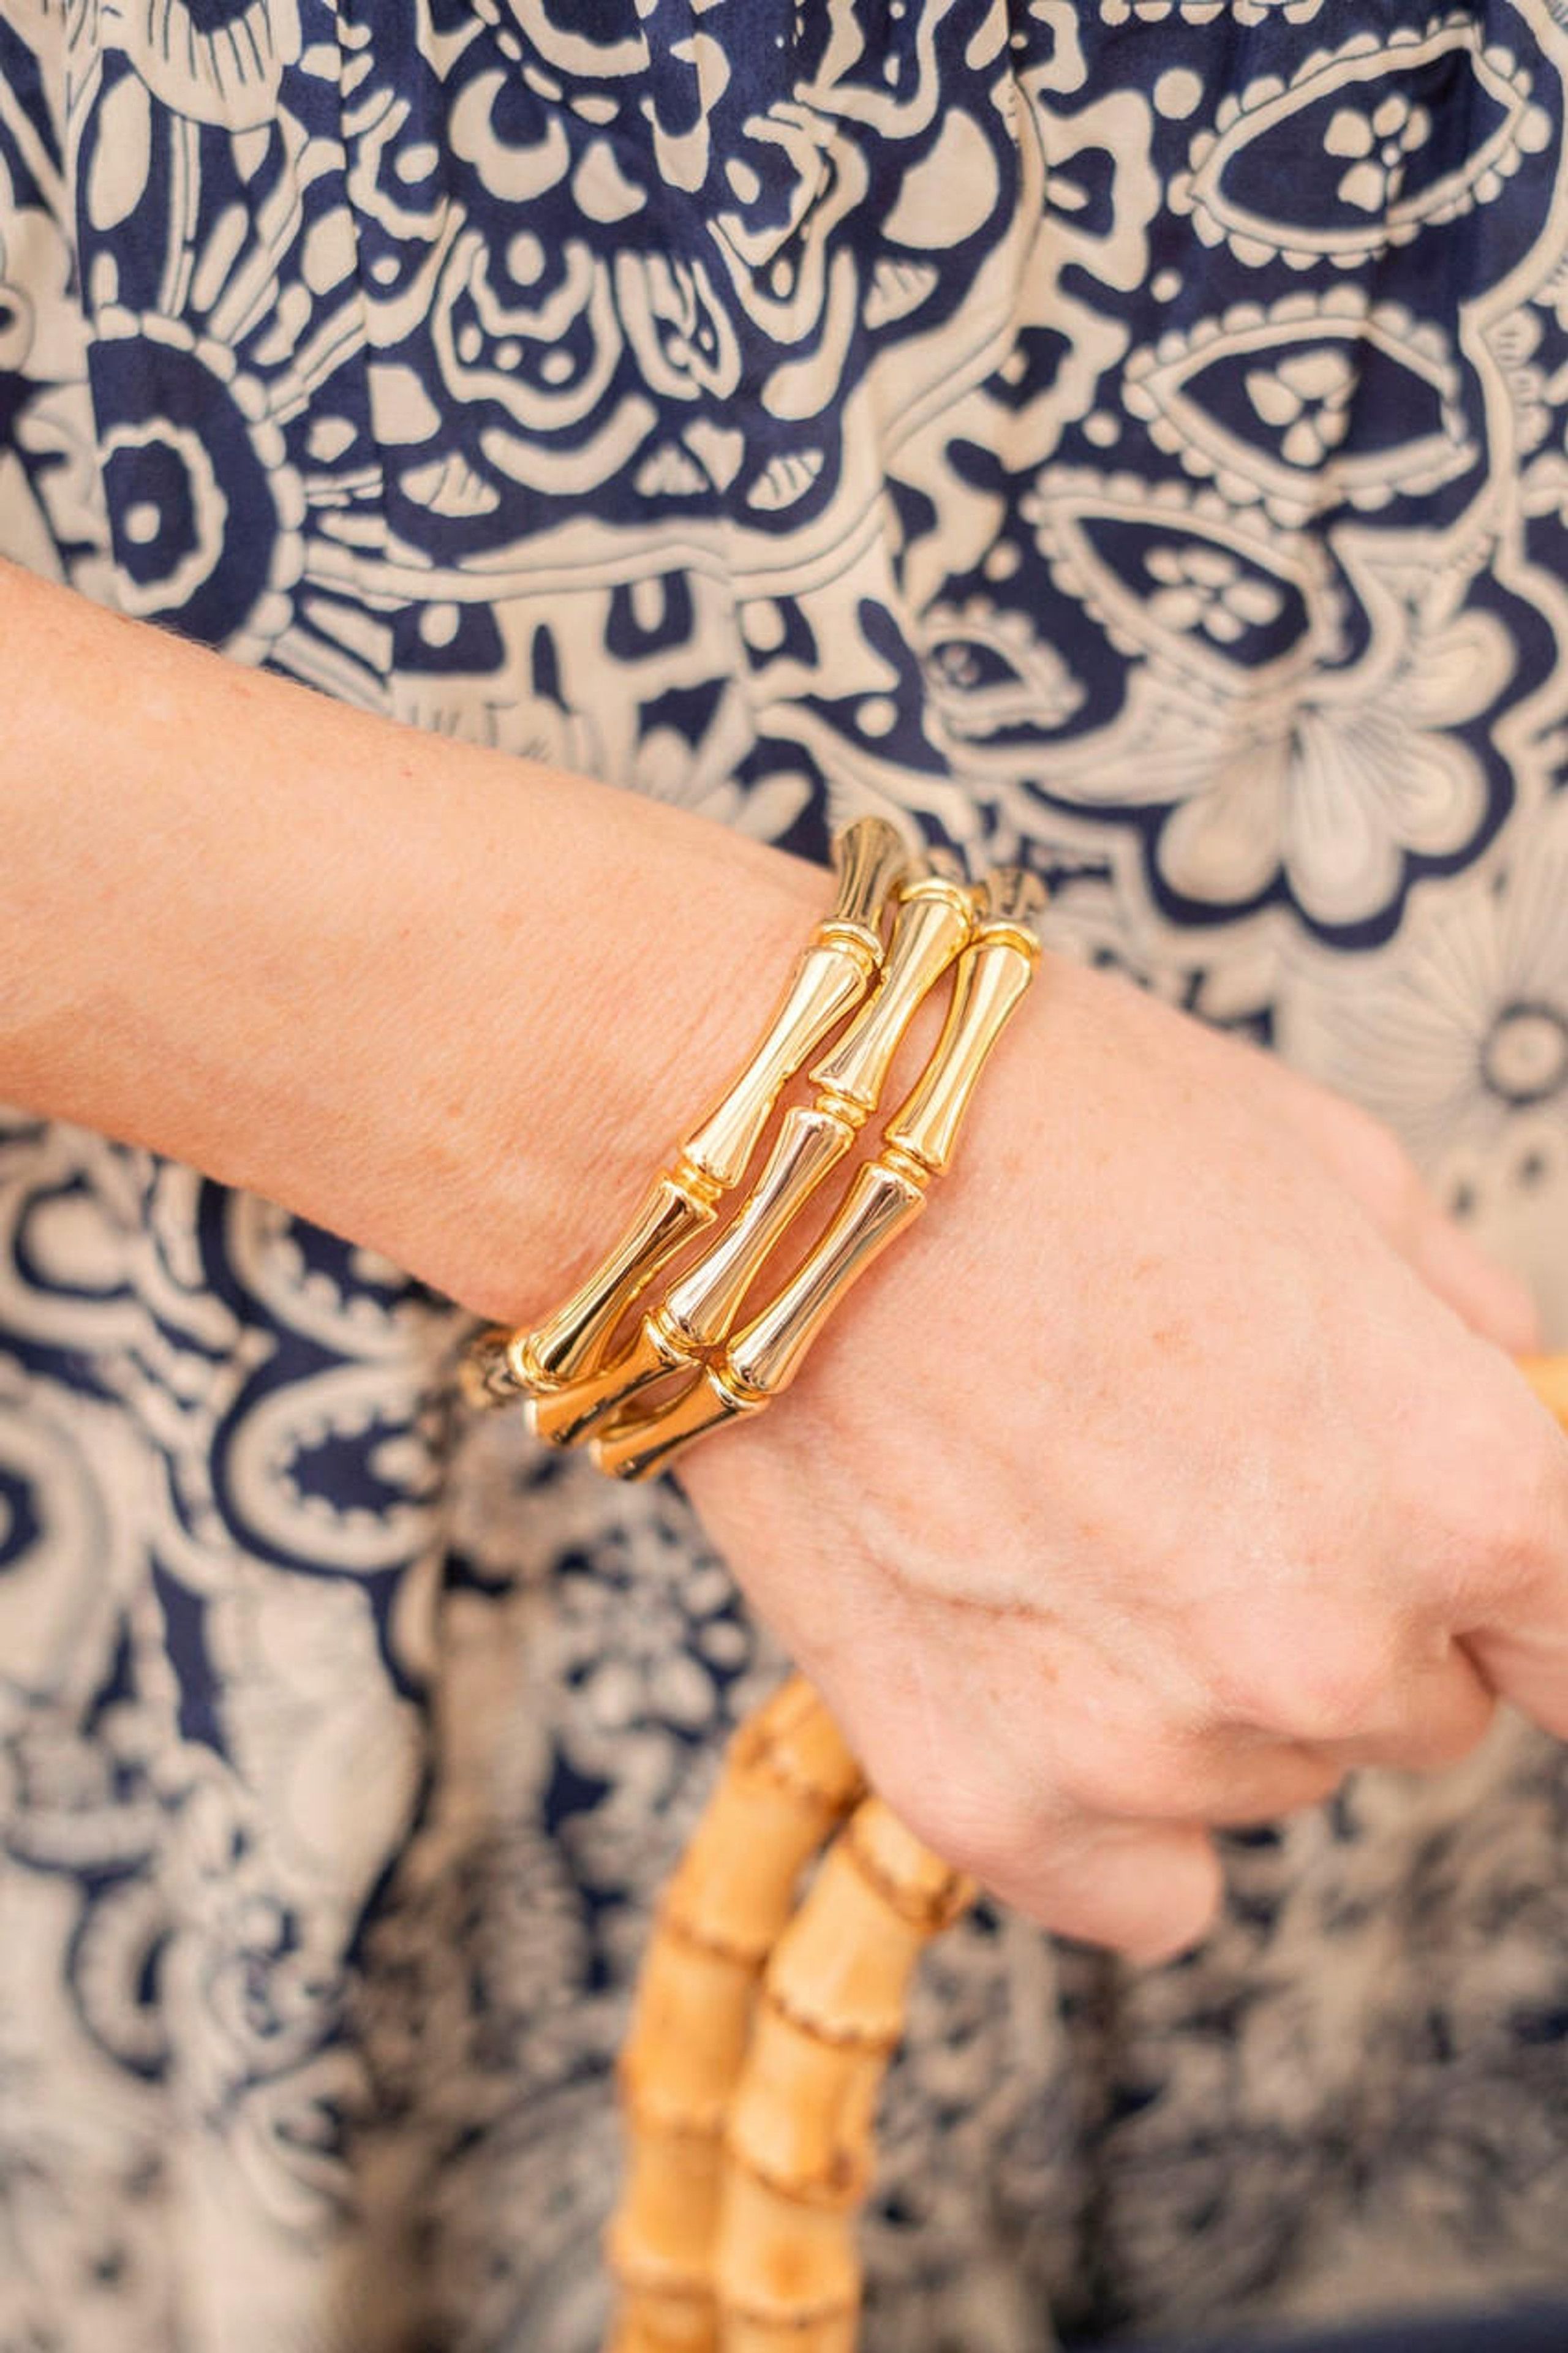 Lucy - 3 Gold Bracelet Stack - Bamboo Acrylic | Lisi Lerch Inc